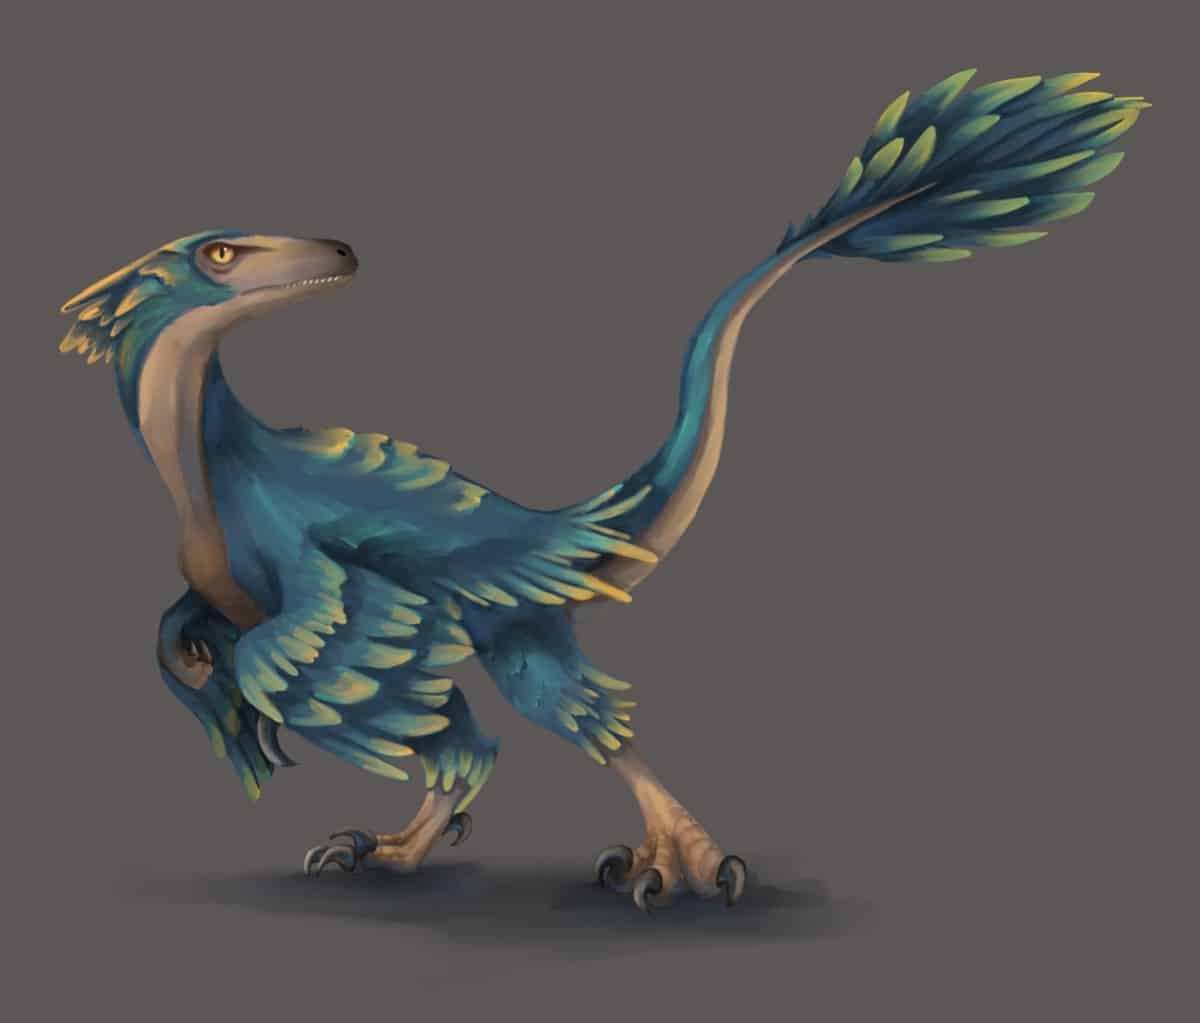 Velociraptor | A Swift Predator from the Cretaceous Period. The Velociraptor were feathered theropod dinosaurs about the size of a wolf. They lived in eastern Asia during the late Cretaceous period.